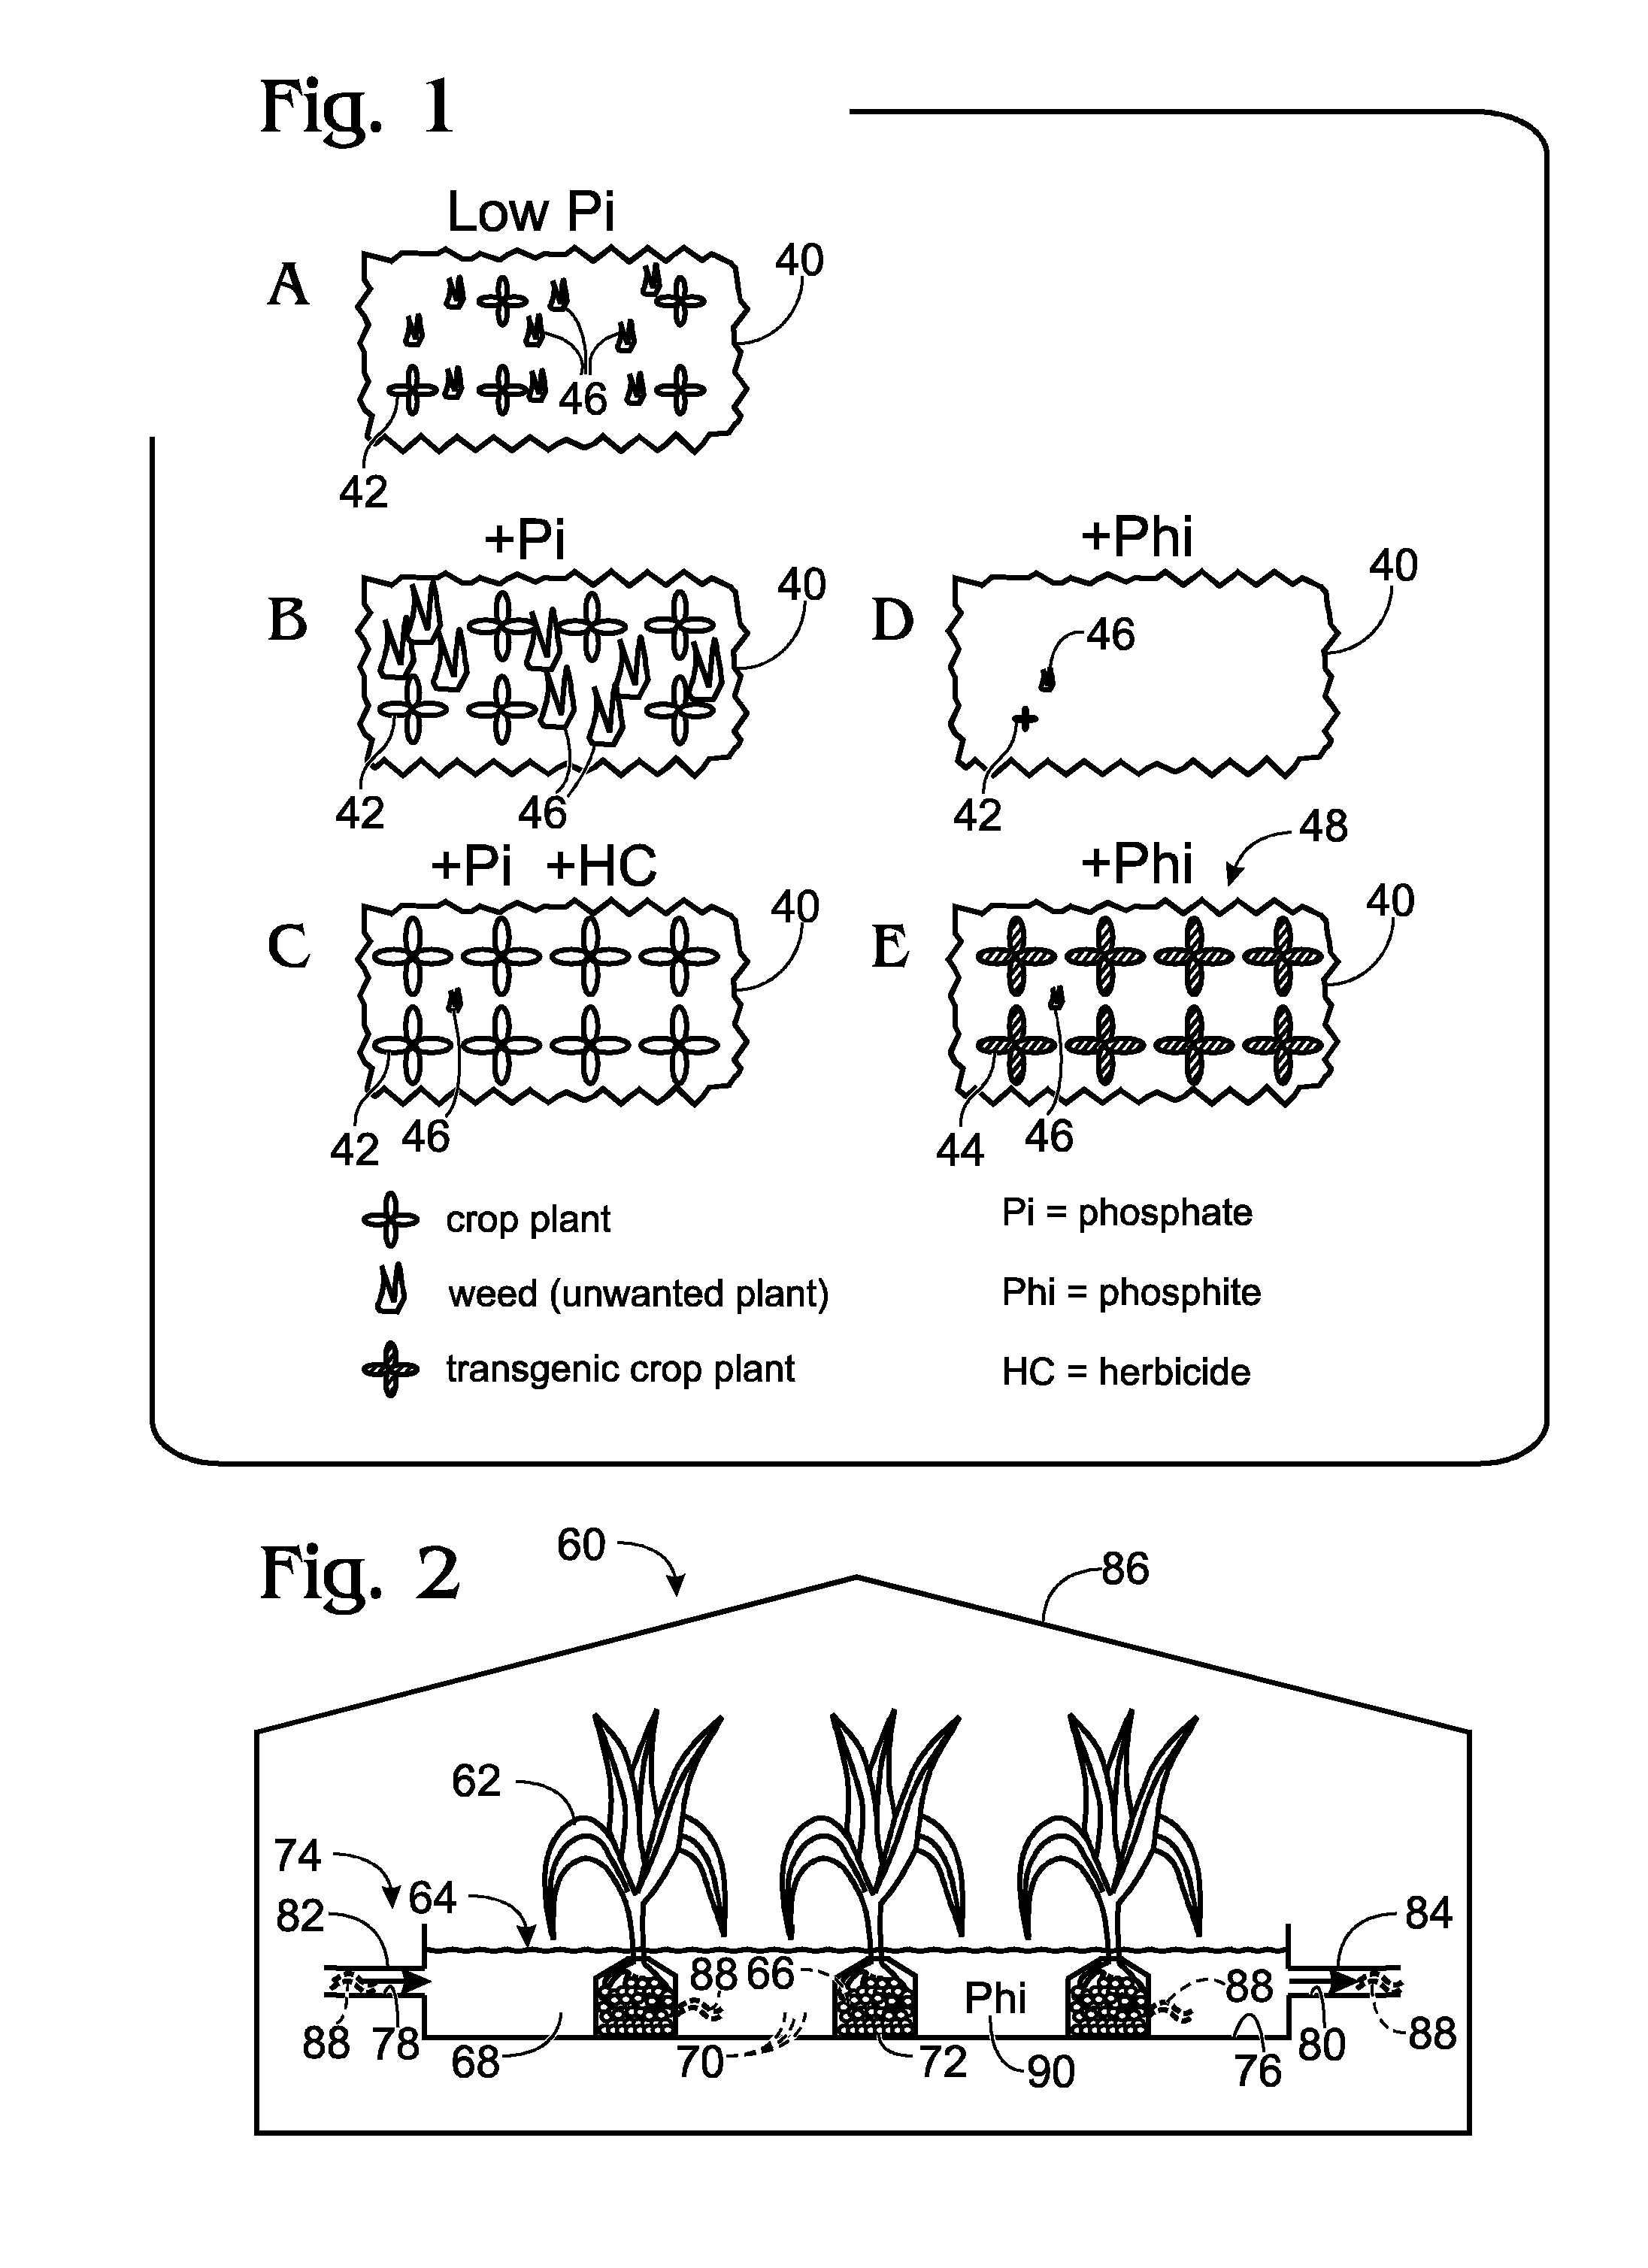 Plant cultivation system utilizing phosphite as a nutrient and as a control agent for weeds and algae